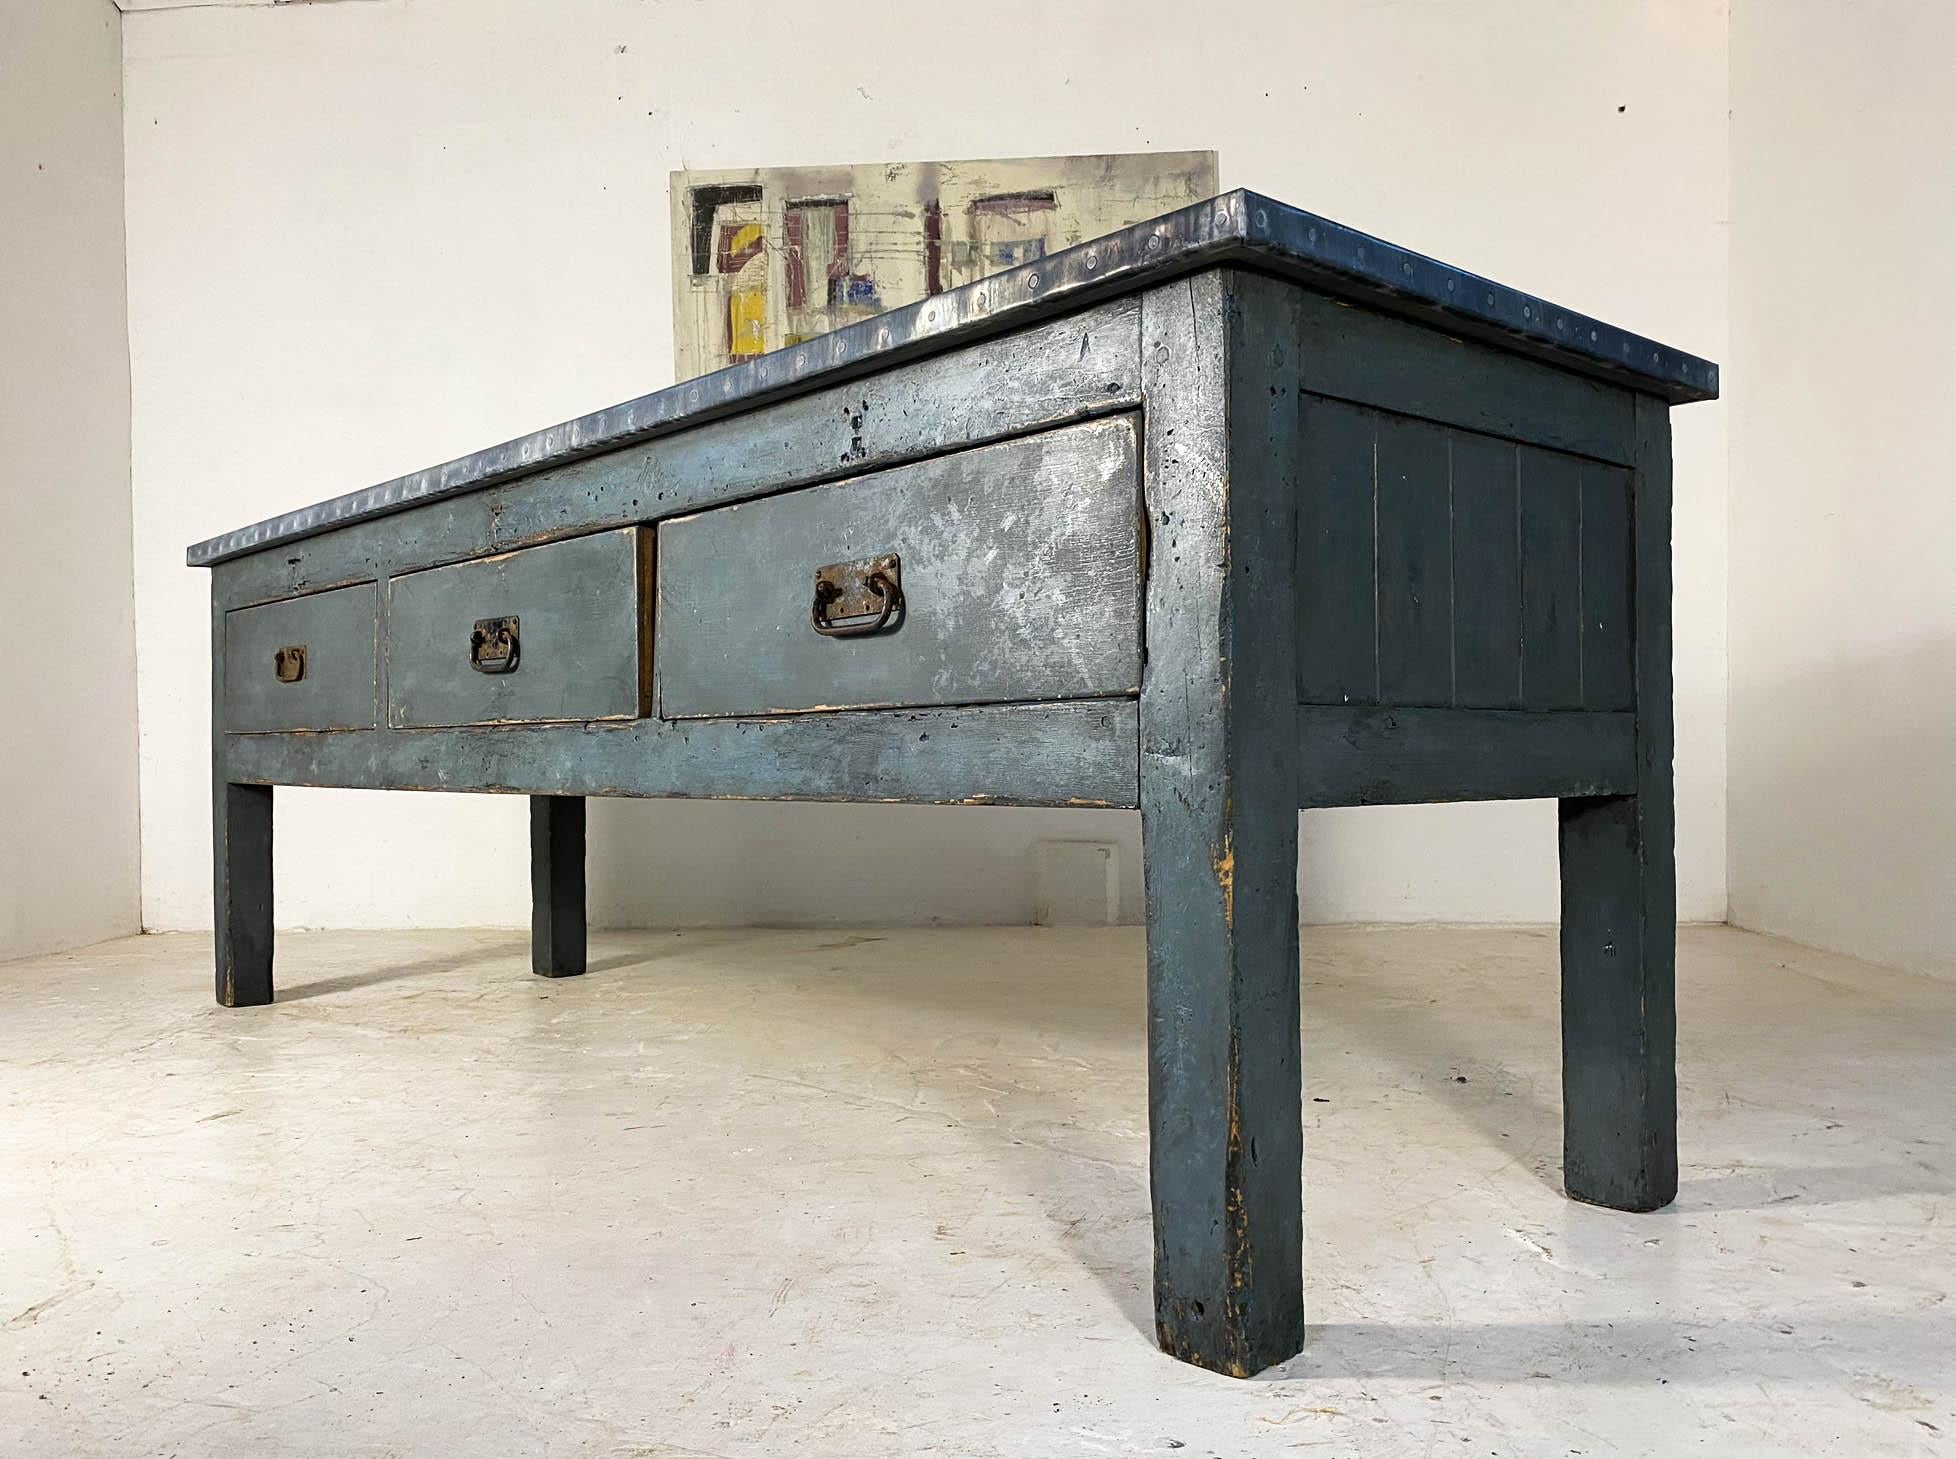 Fully restored industrial workbench which has three large drawers with original pull handles and finished with an aged zinc top. It has been later painted in a dark grey which contrasts perfectly with the zinc and is clean and ready to go!

It is